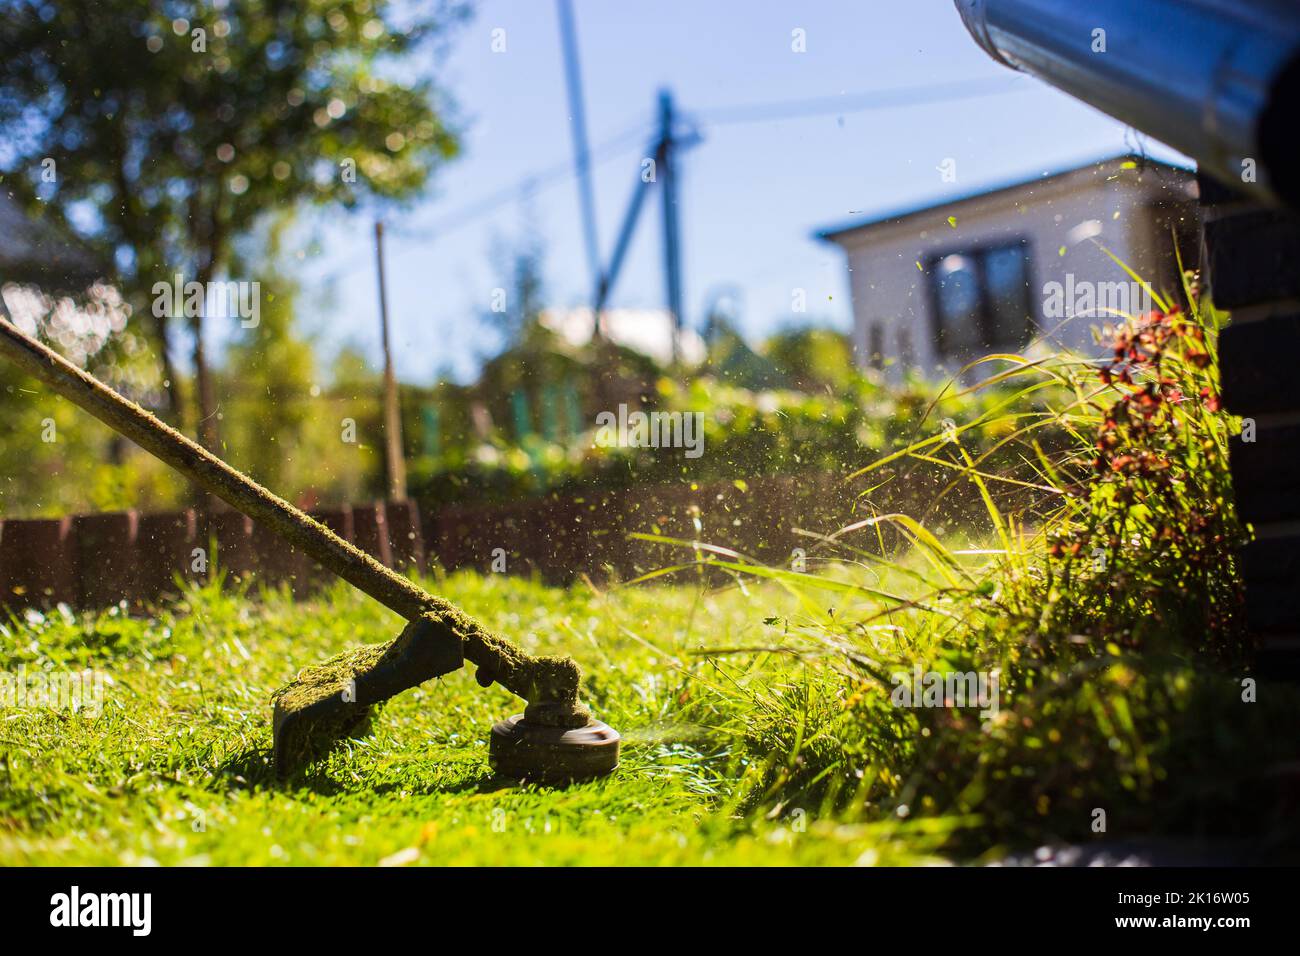 Man mowing tall grass with electric or petrol lawn trimmer in backyard. Gardening care tools and equipment. Process of lawn trimming with hand mower Stock Photo